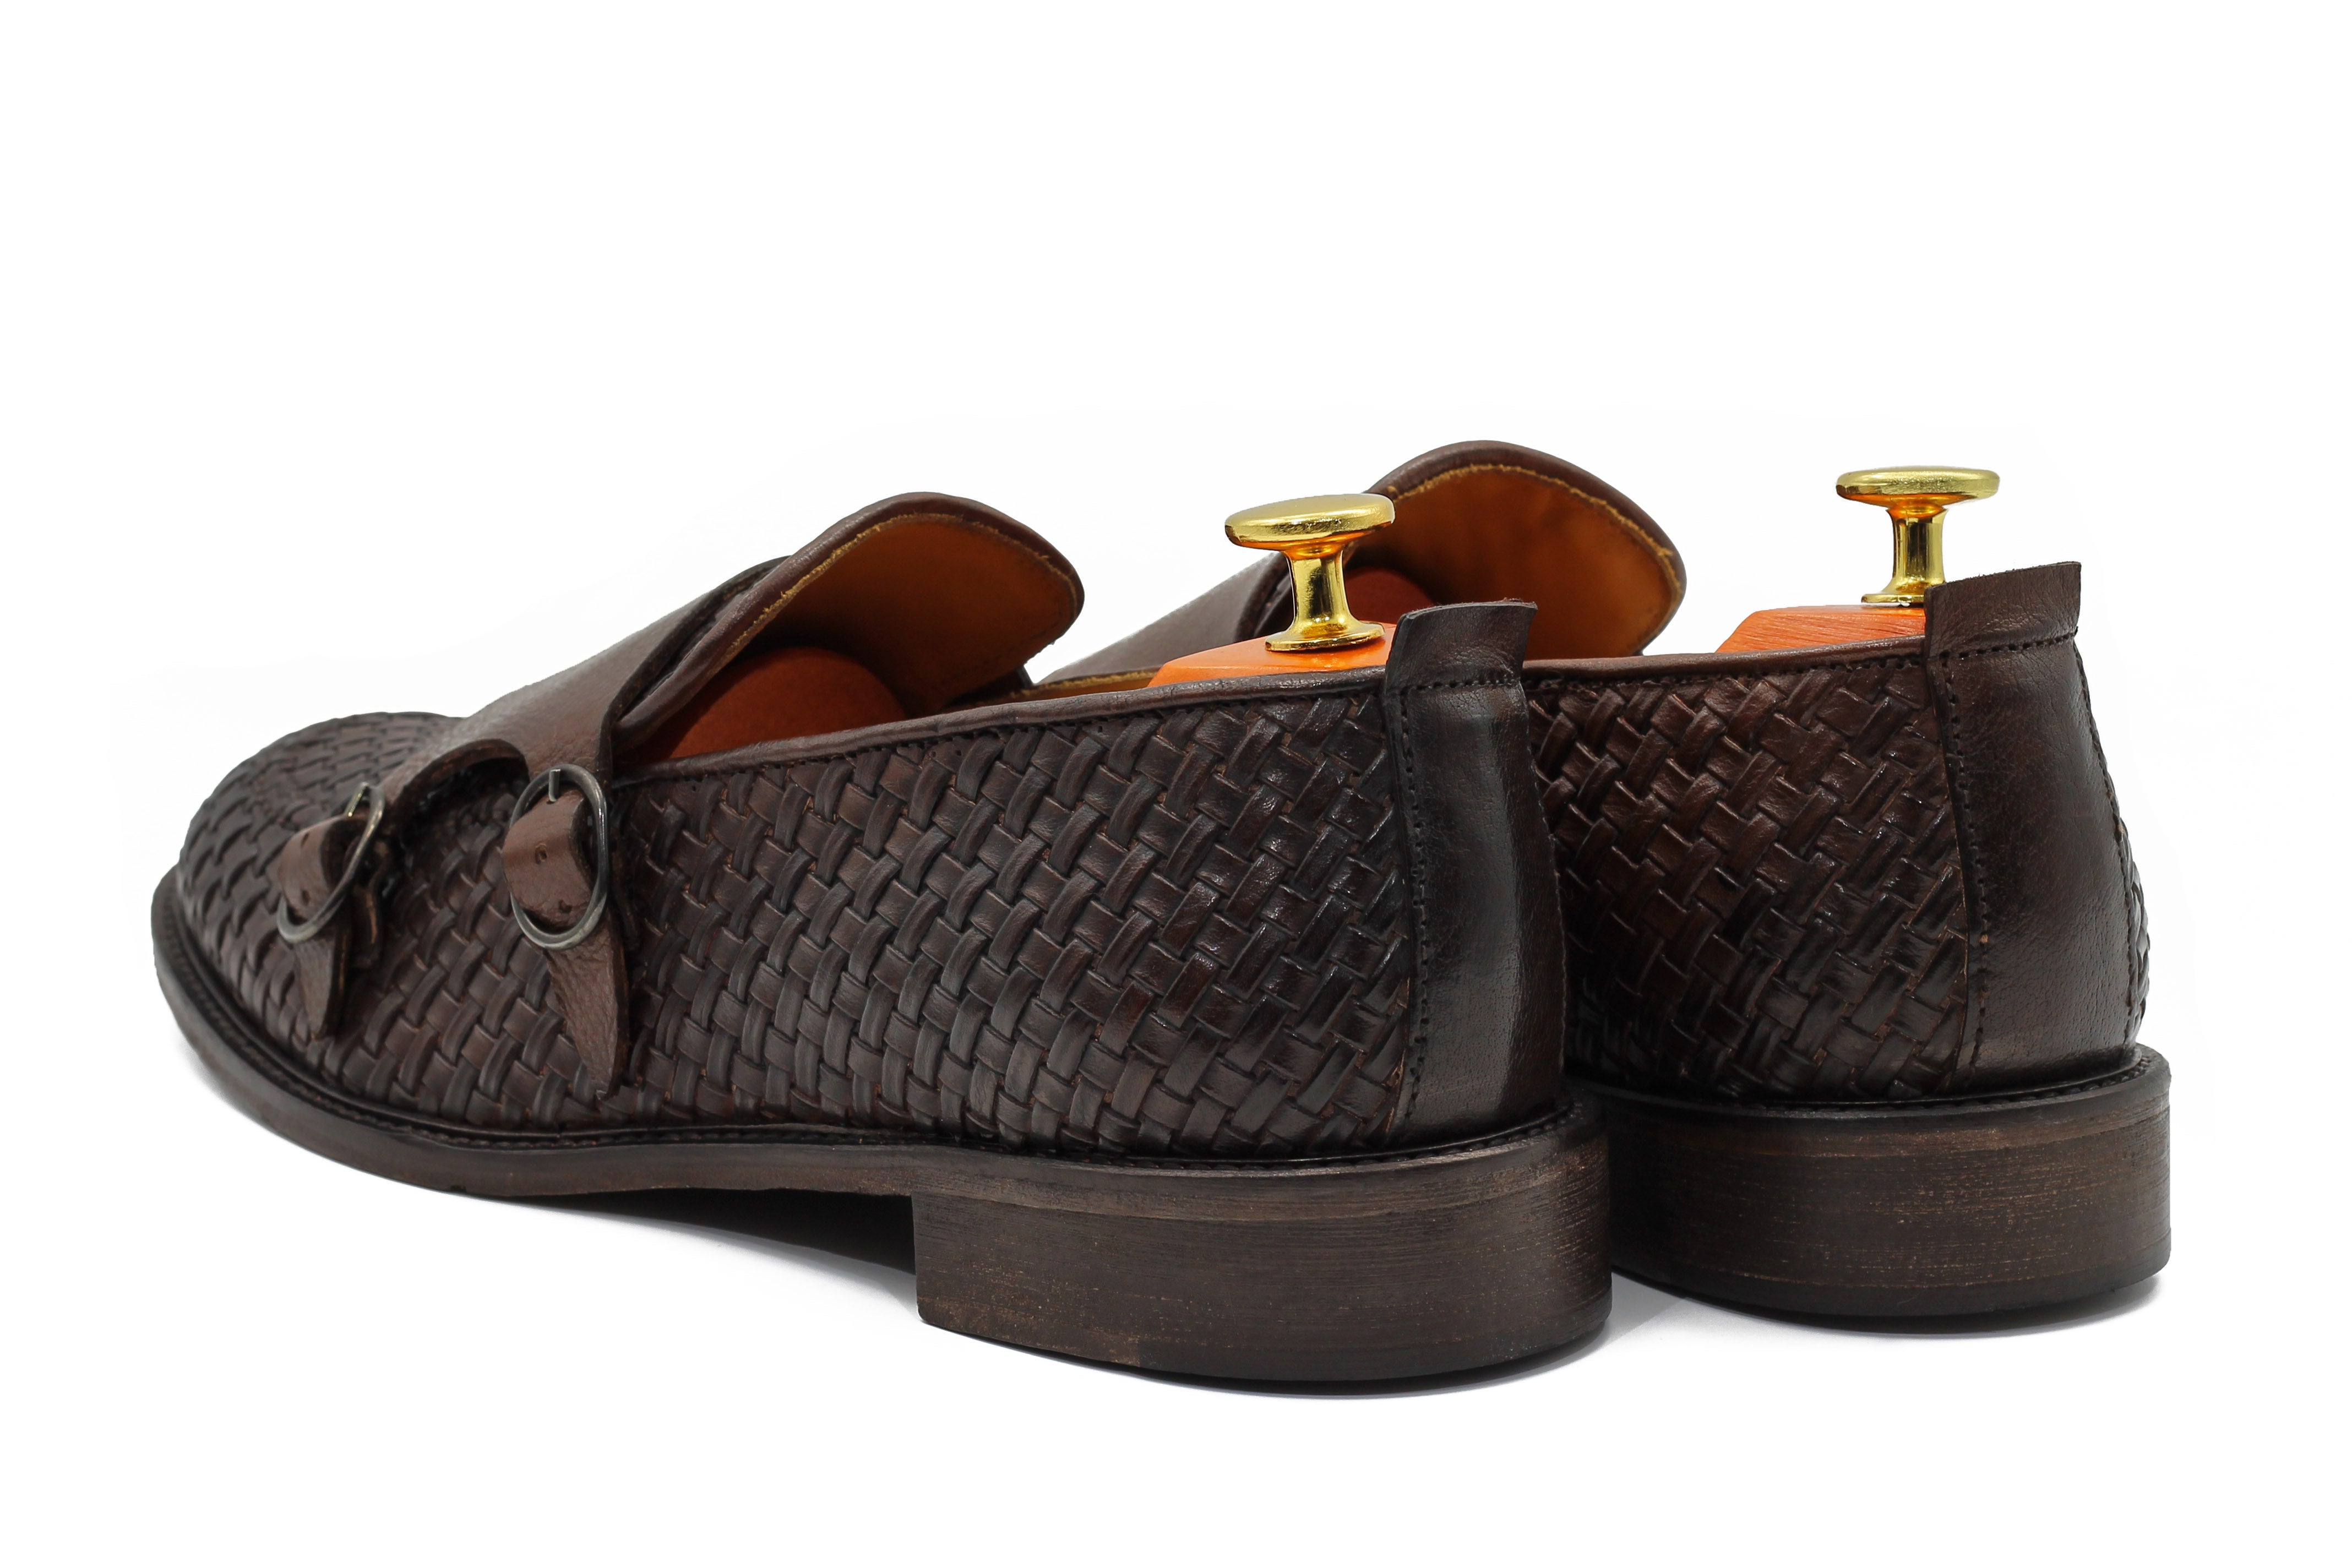 FLORENCE 2 - DOUBLE BUCKLE MONK LOAFER IN BROWN INTERWEAVE ITALIAN LEATHER